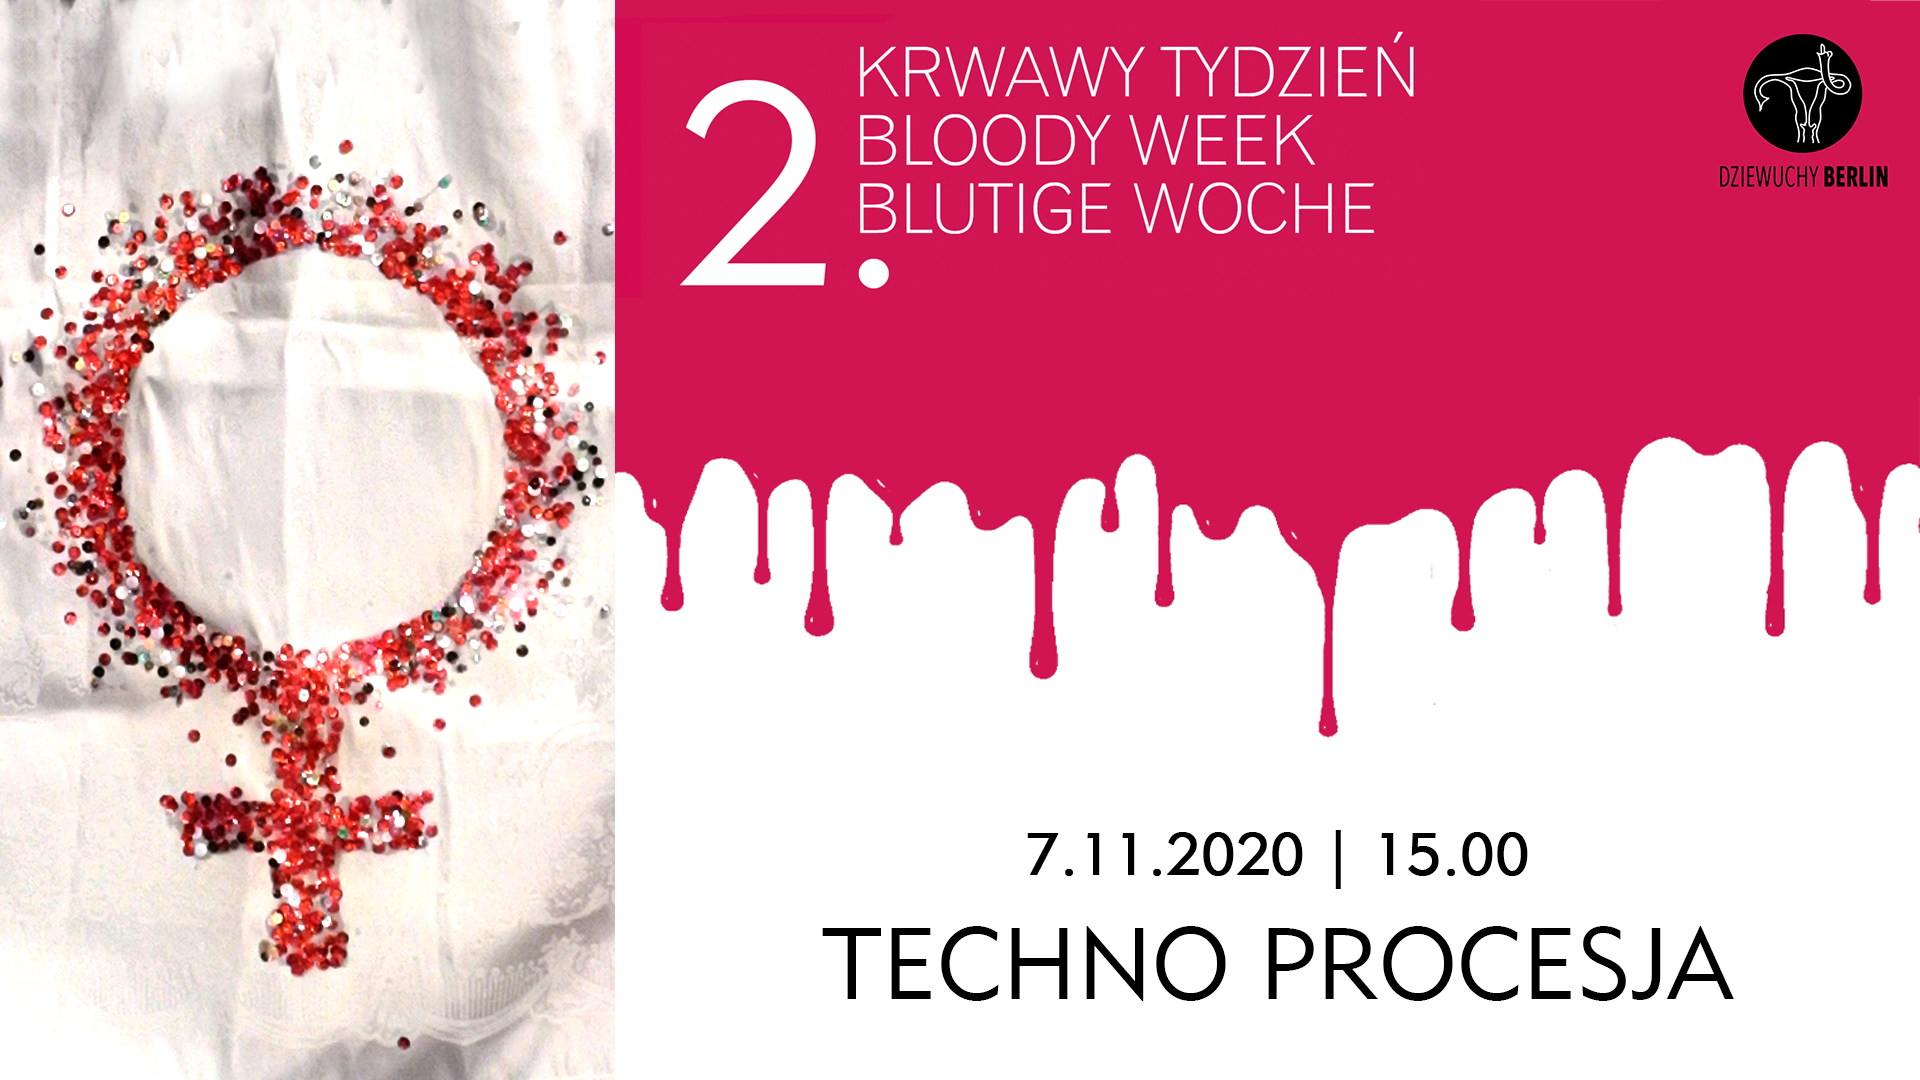 2. Bloody Week: 7.11.2020 TECHNO PROCESJA – IF I CAN’T DANCE, IT’S NOT MY REVOLUTION